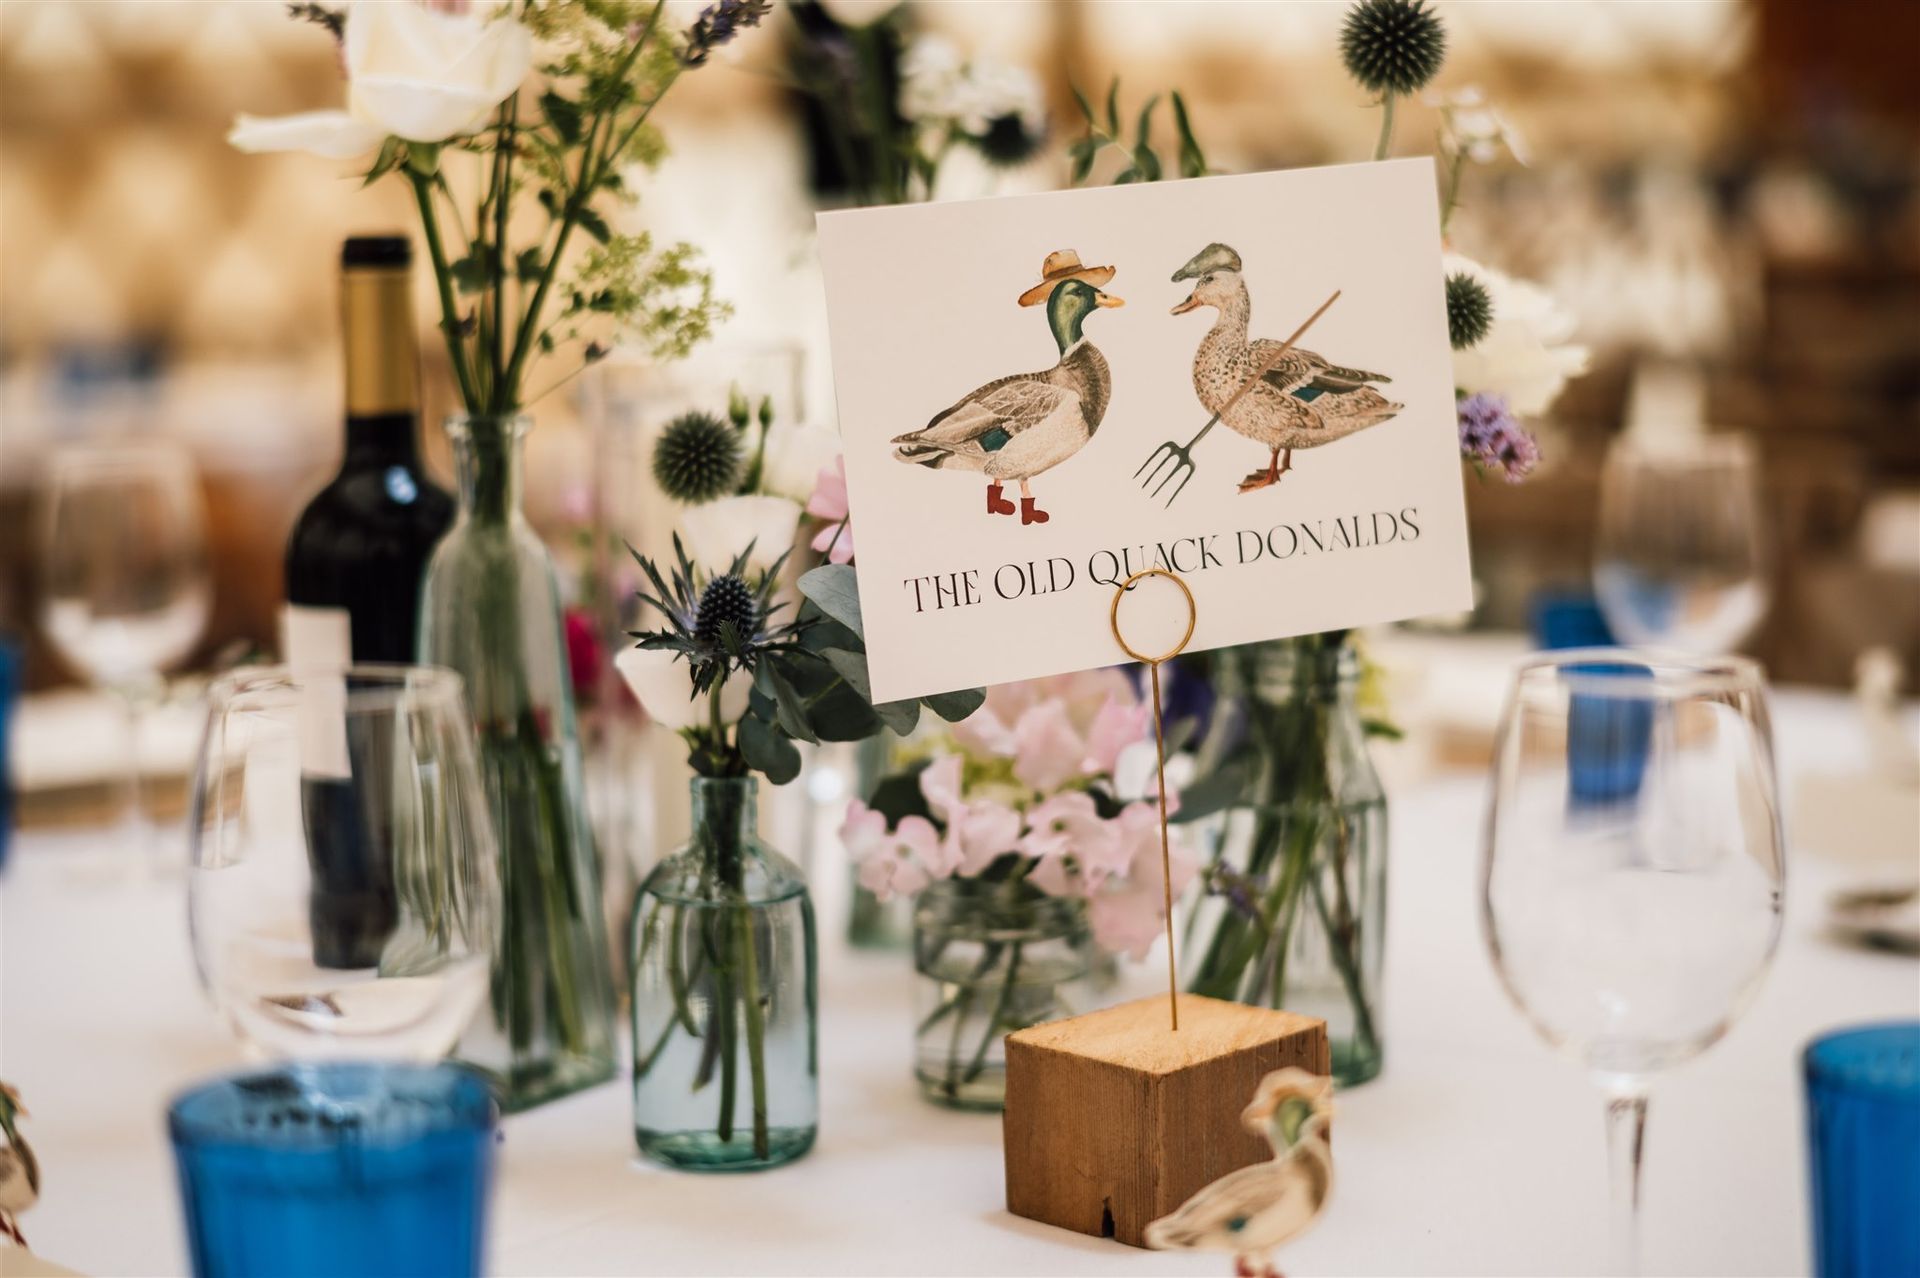 Table name at a wedding in a yurt in Wiltshire co-ordinated by Tasha Mae Wedding Co-ordinator.